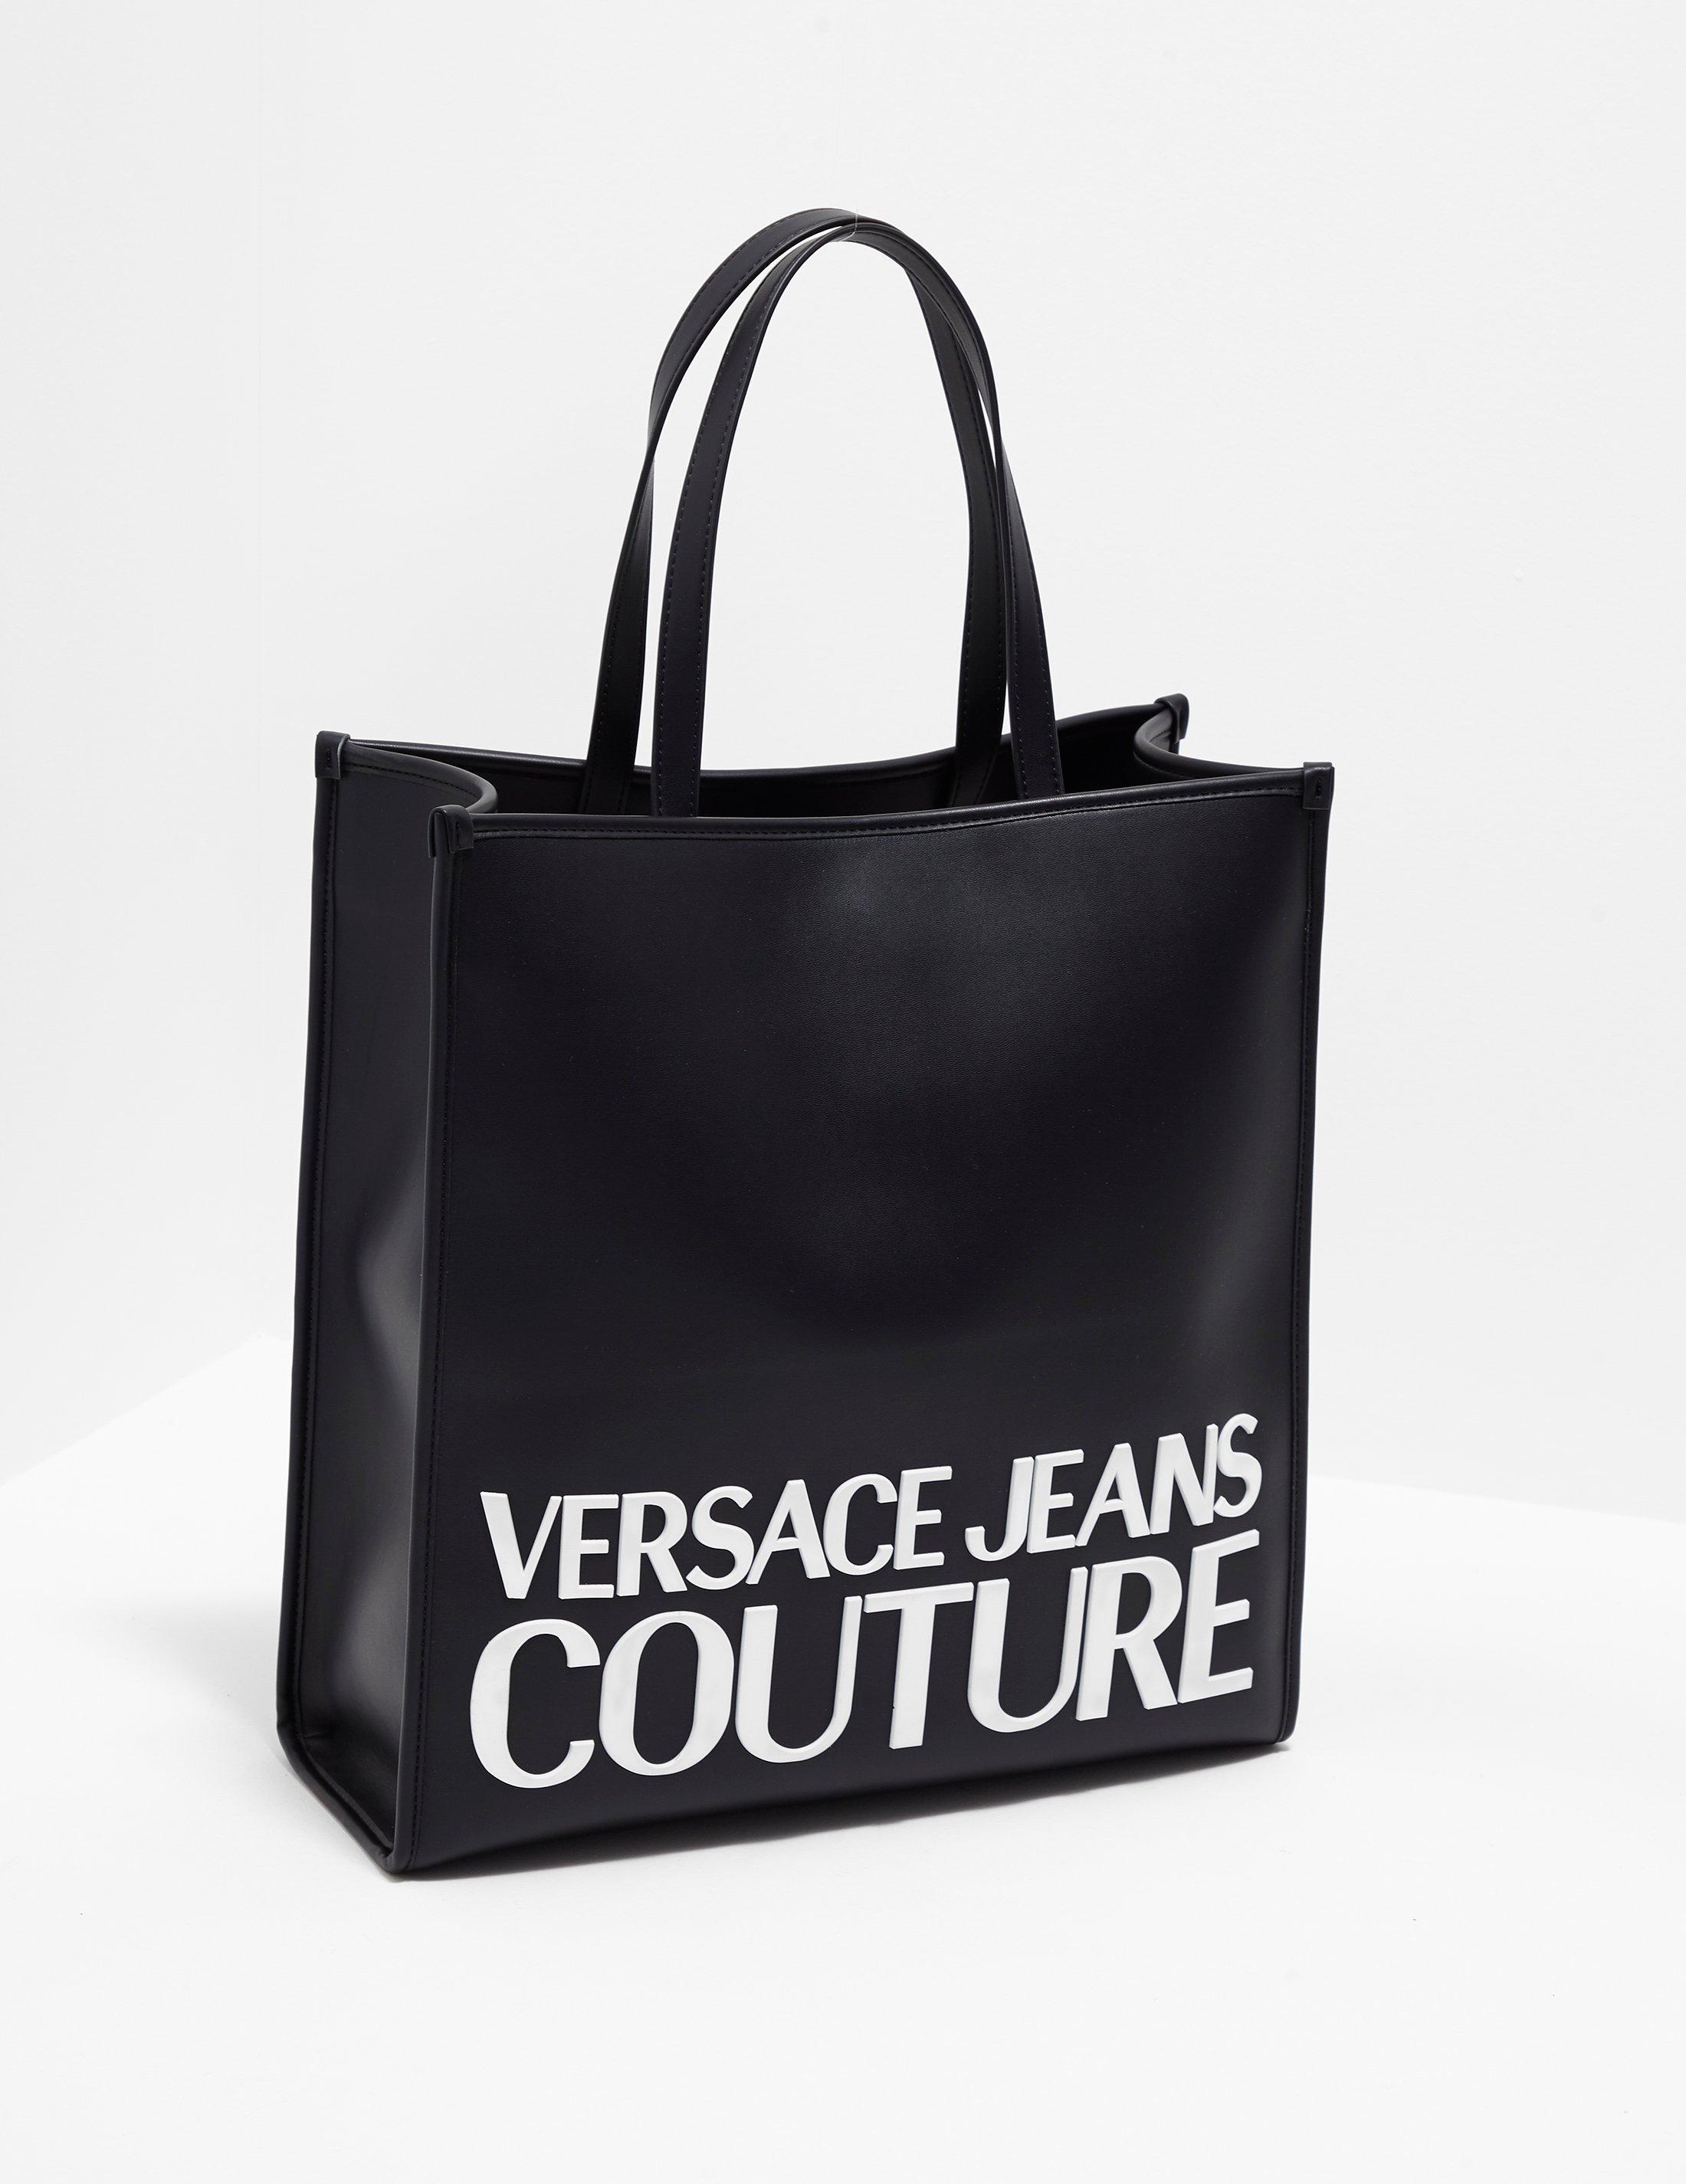 Versace Jeans Couture Logo Tote Bag Black - Lyst